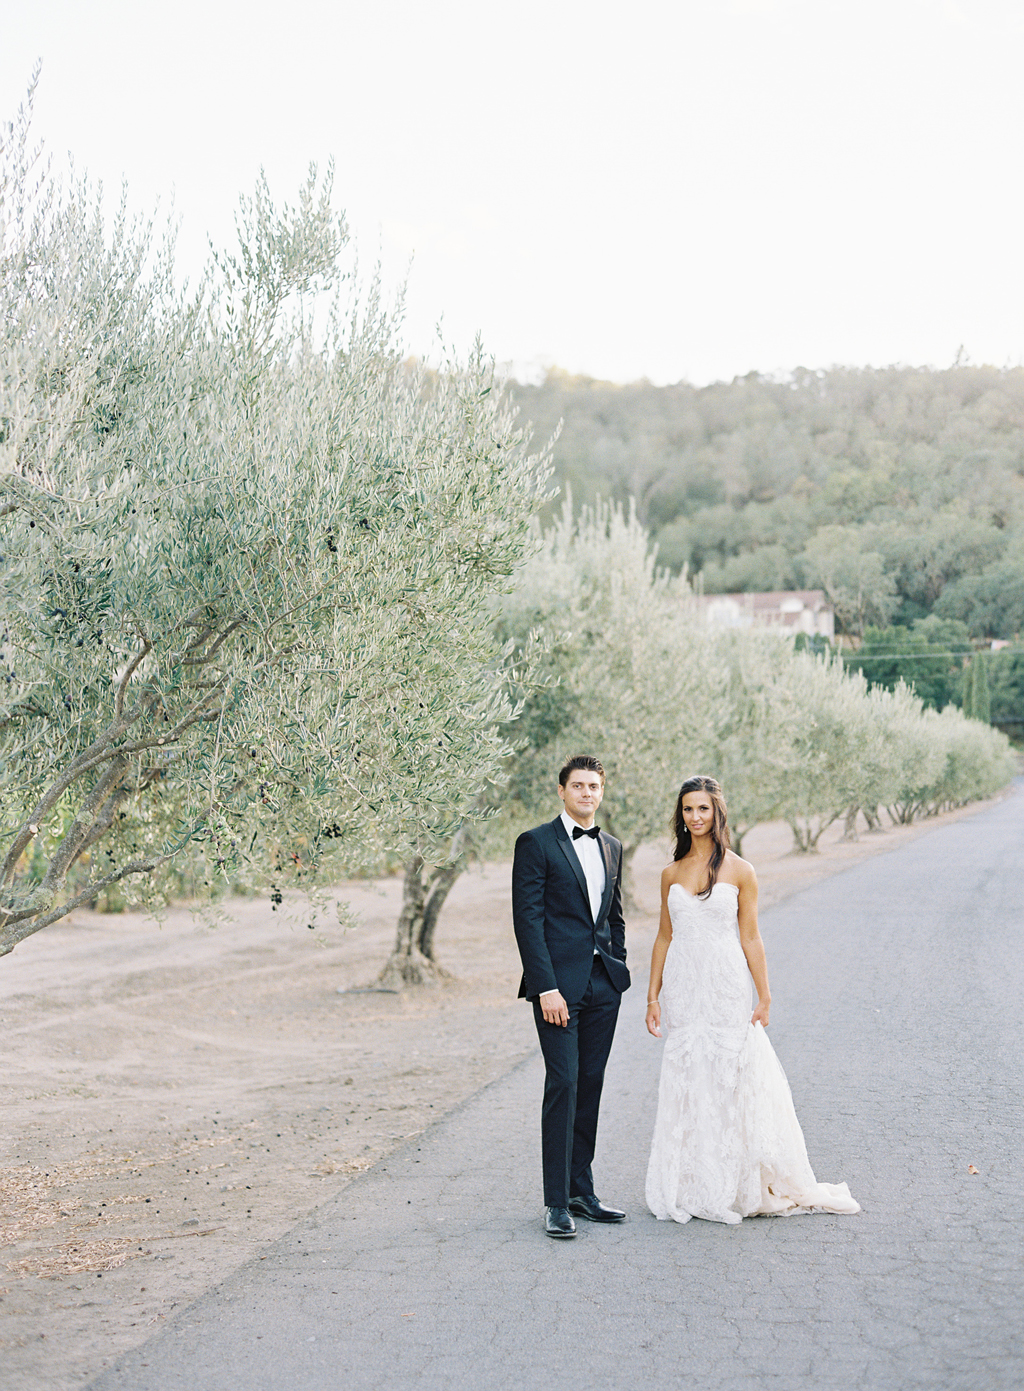 A portrait of a bride and groom on their wedding day in St. Helena, California. 